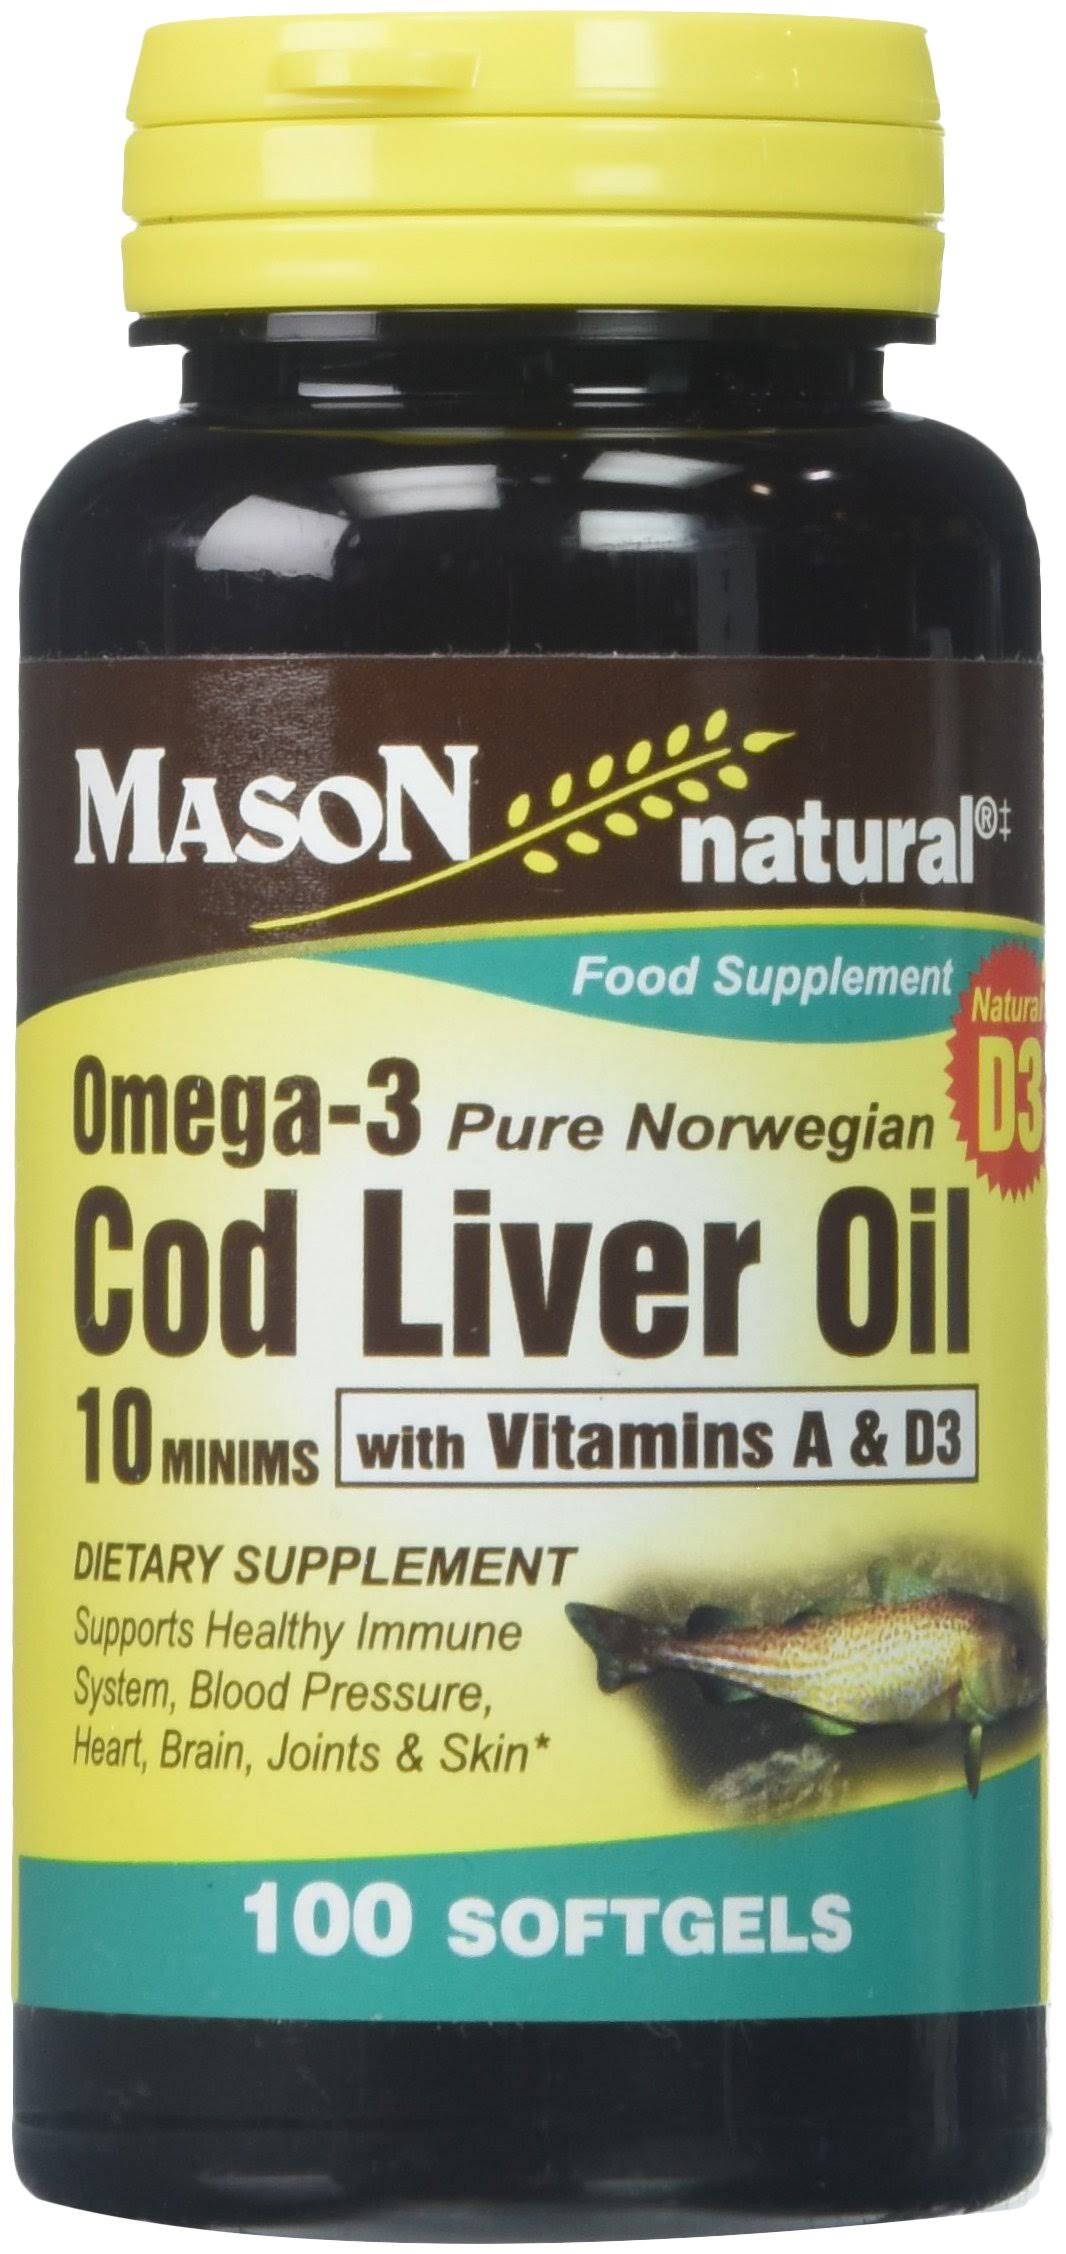 Mason Natural Omega 3 Cod Liver Oil with Vitamin A and D3 Food Supplement - 100 Softgels